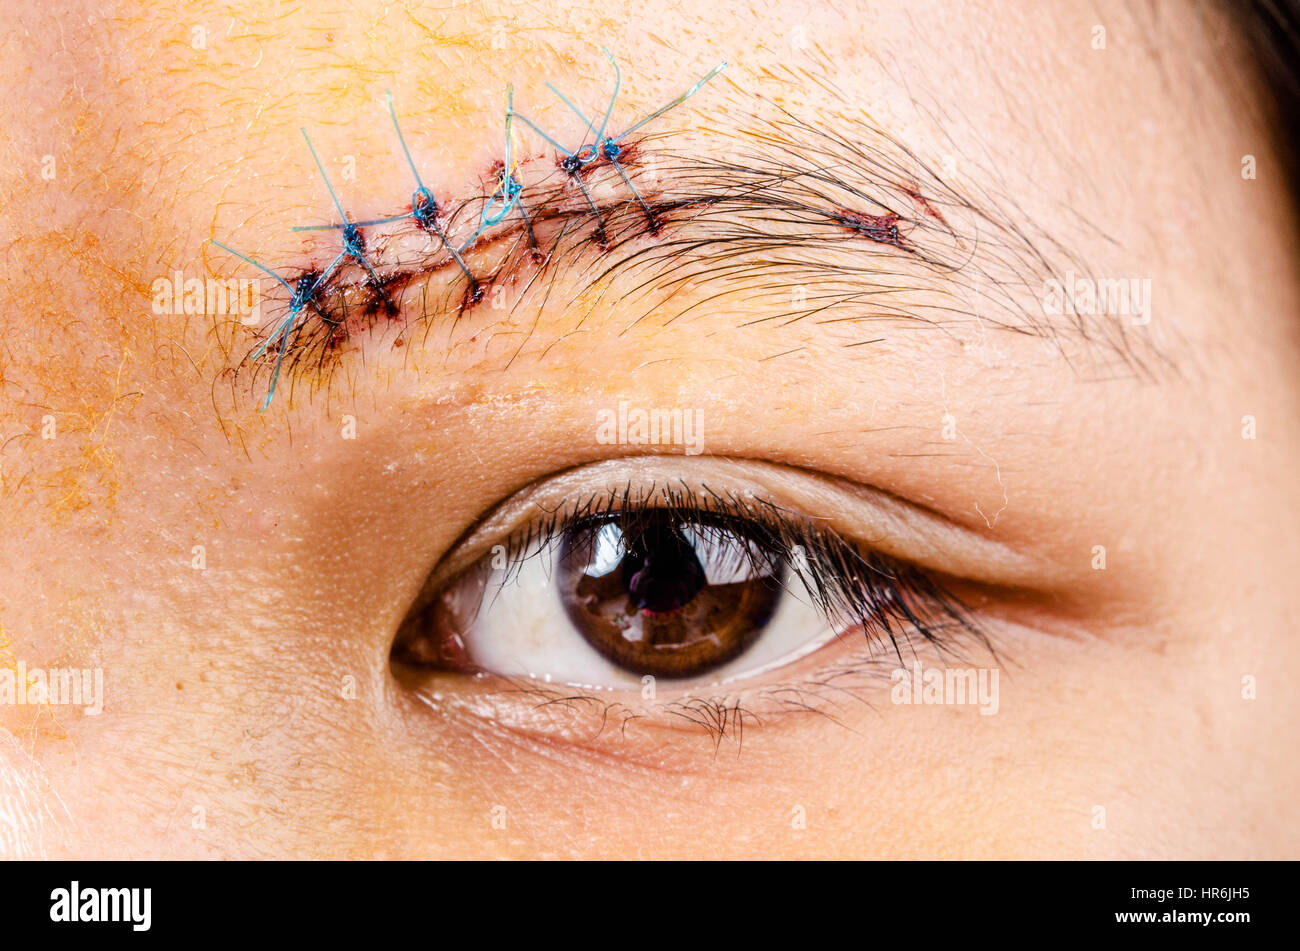 scar form stitched up skin after an operation with a blue fiber at eyebrow area Stock Photo